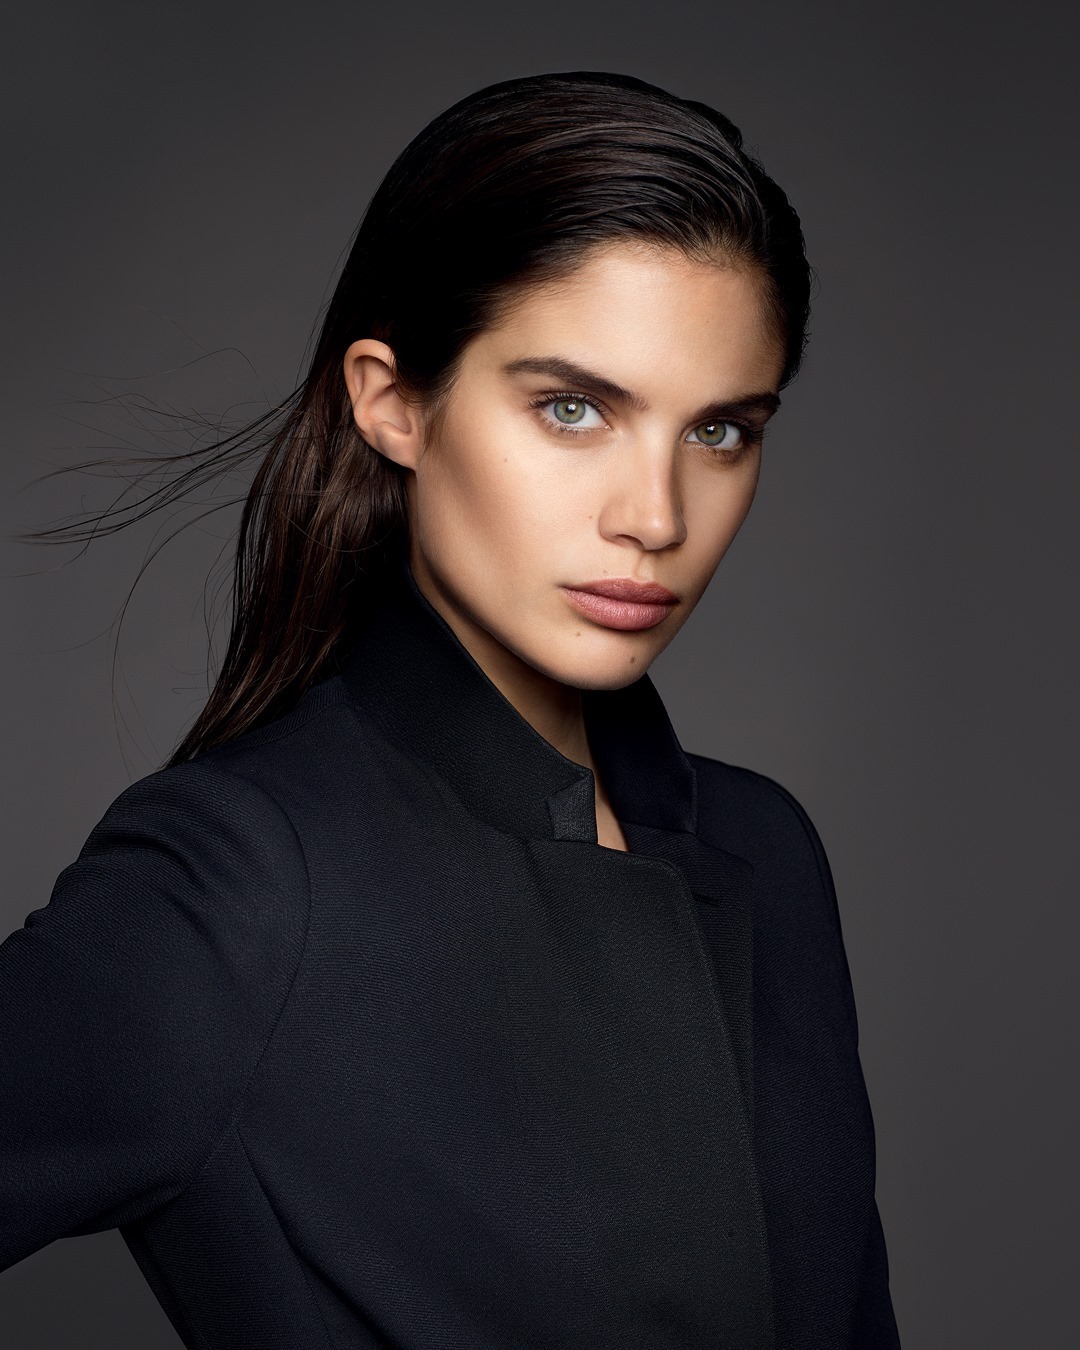 Armani beauty - High coverage, high confidence. @SaraSampaio wears POWER FABRIC in shade 6.5 for a perfect, velvet matte finish that lasts all day. 

Credit: @karimsadli

#Armanibeauty #PowerFabric #f...